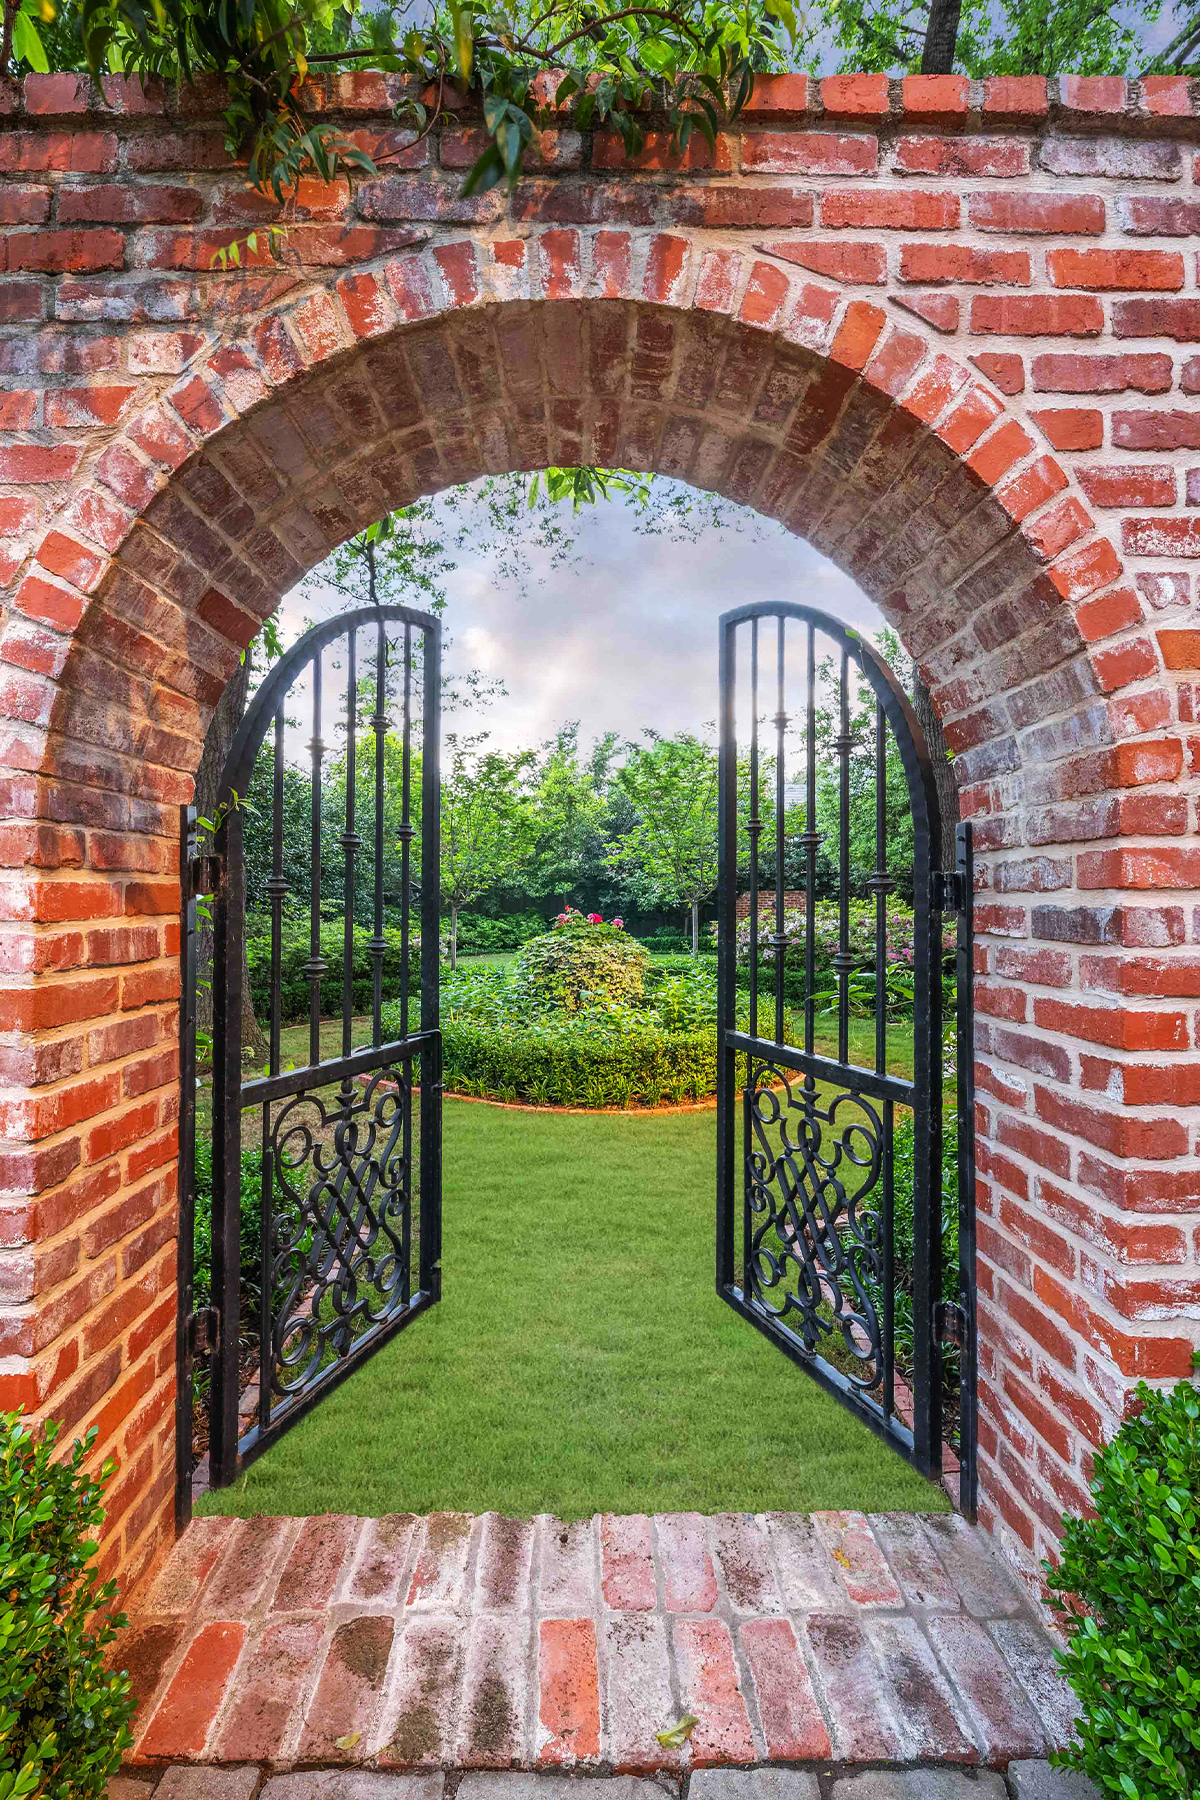 Great Gate Decorative Entrance to Garden